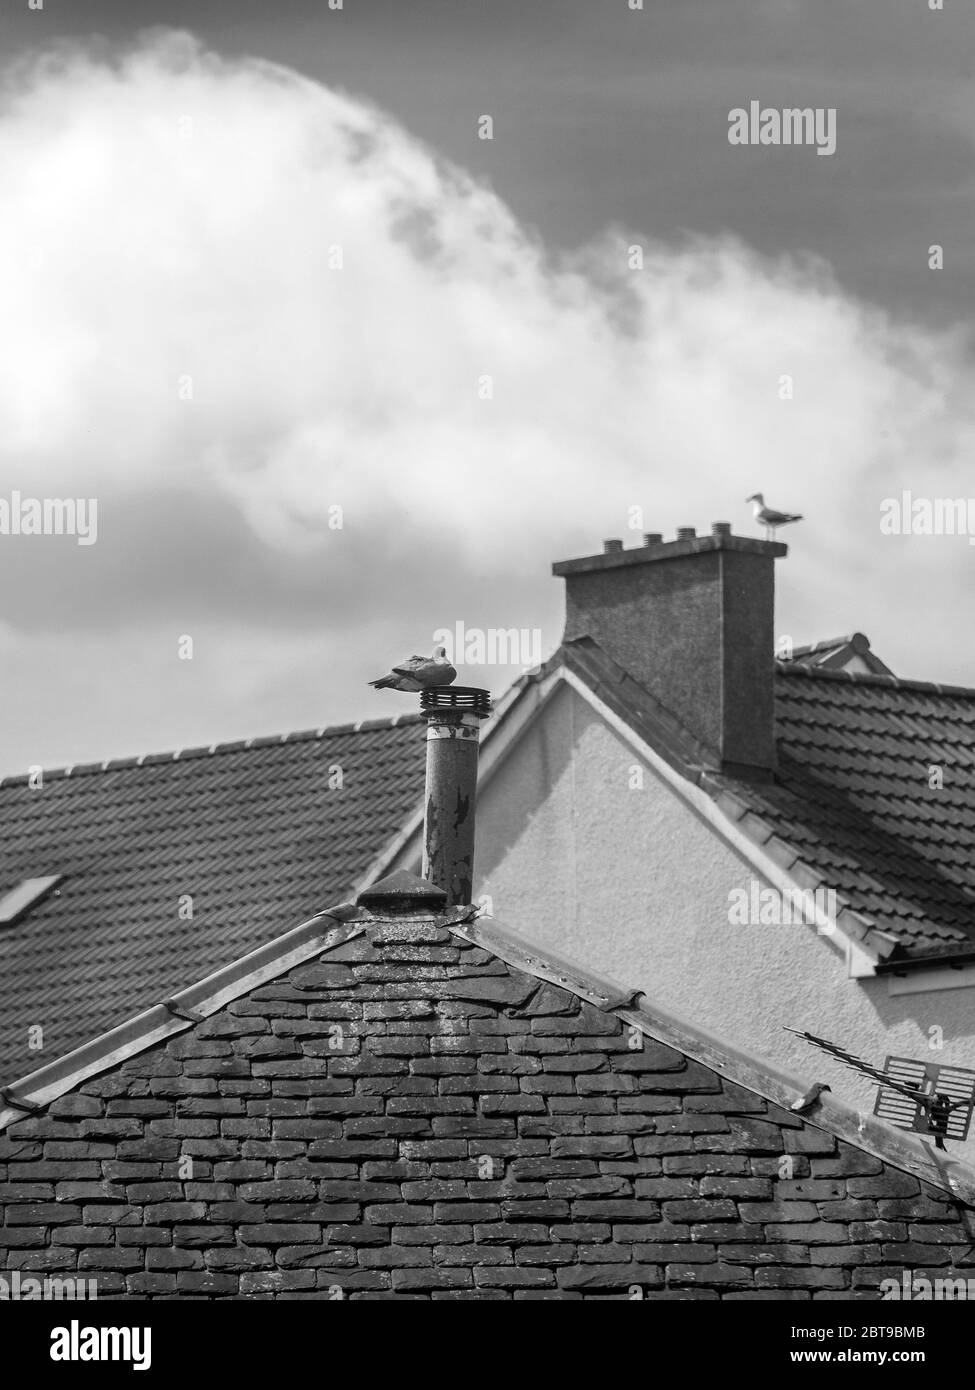 Glasgow, Scotland, UK. 20th May 2020: A black and white photograph of a bird sitting on a slated roof. Stock Photo